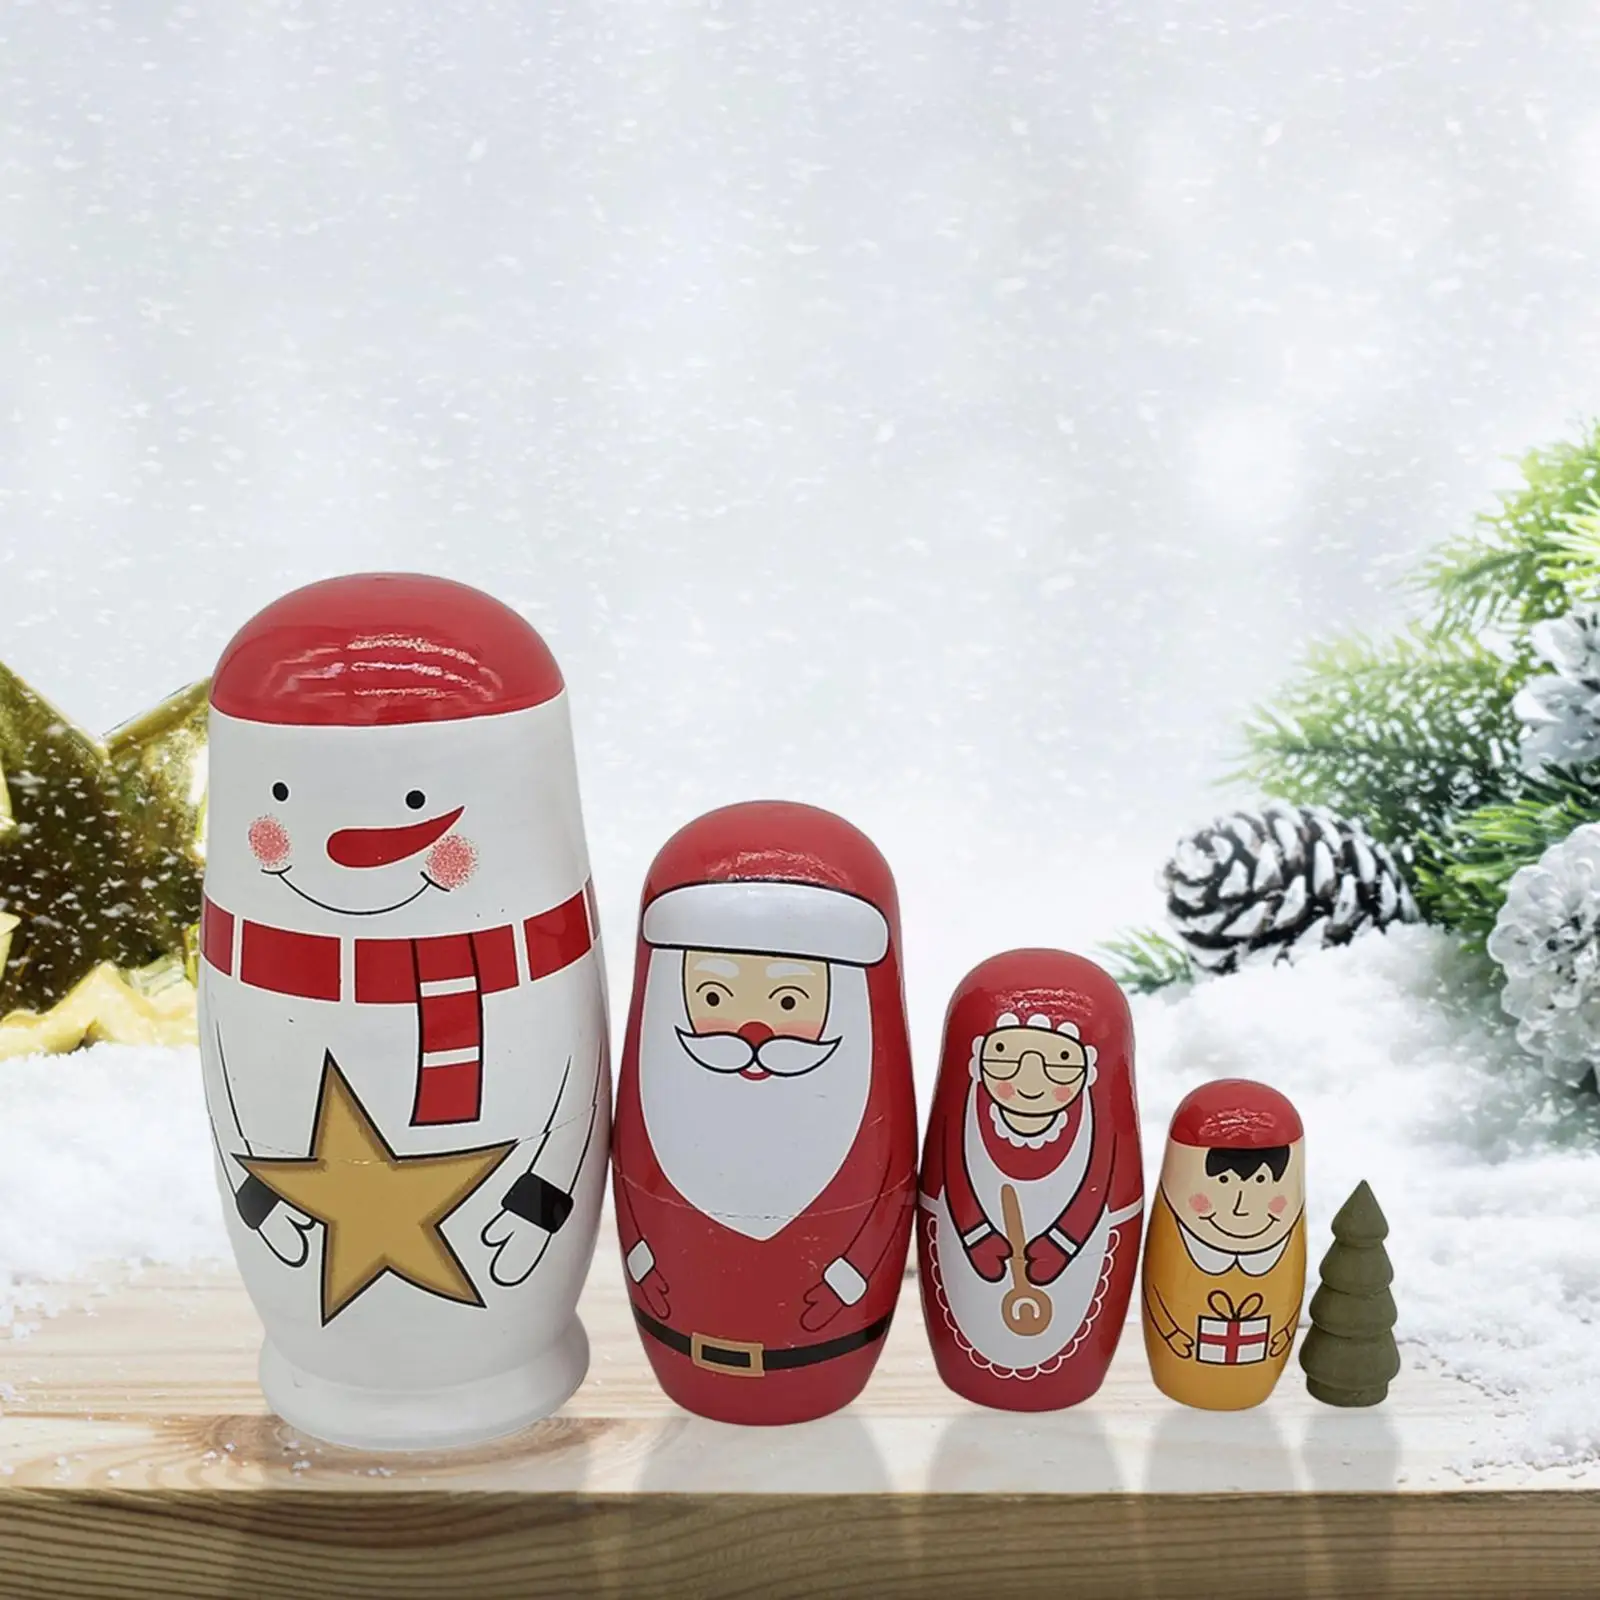 5x Wooden Russian Nesting Dolls Christmas Wood Crafts for Kids New Year Gift